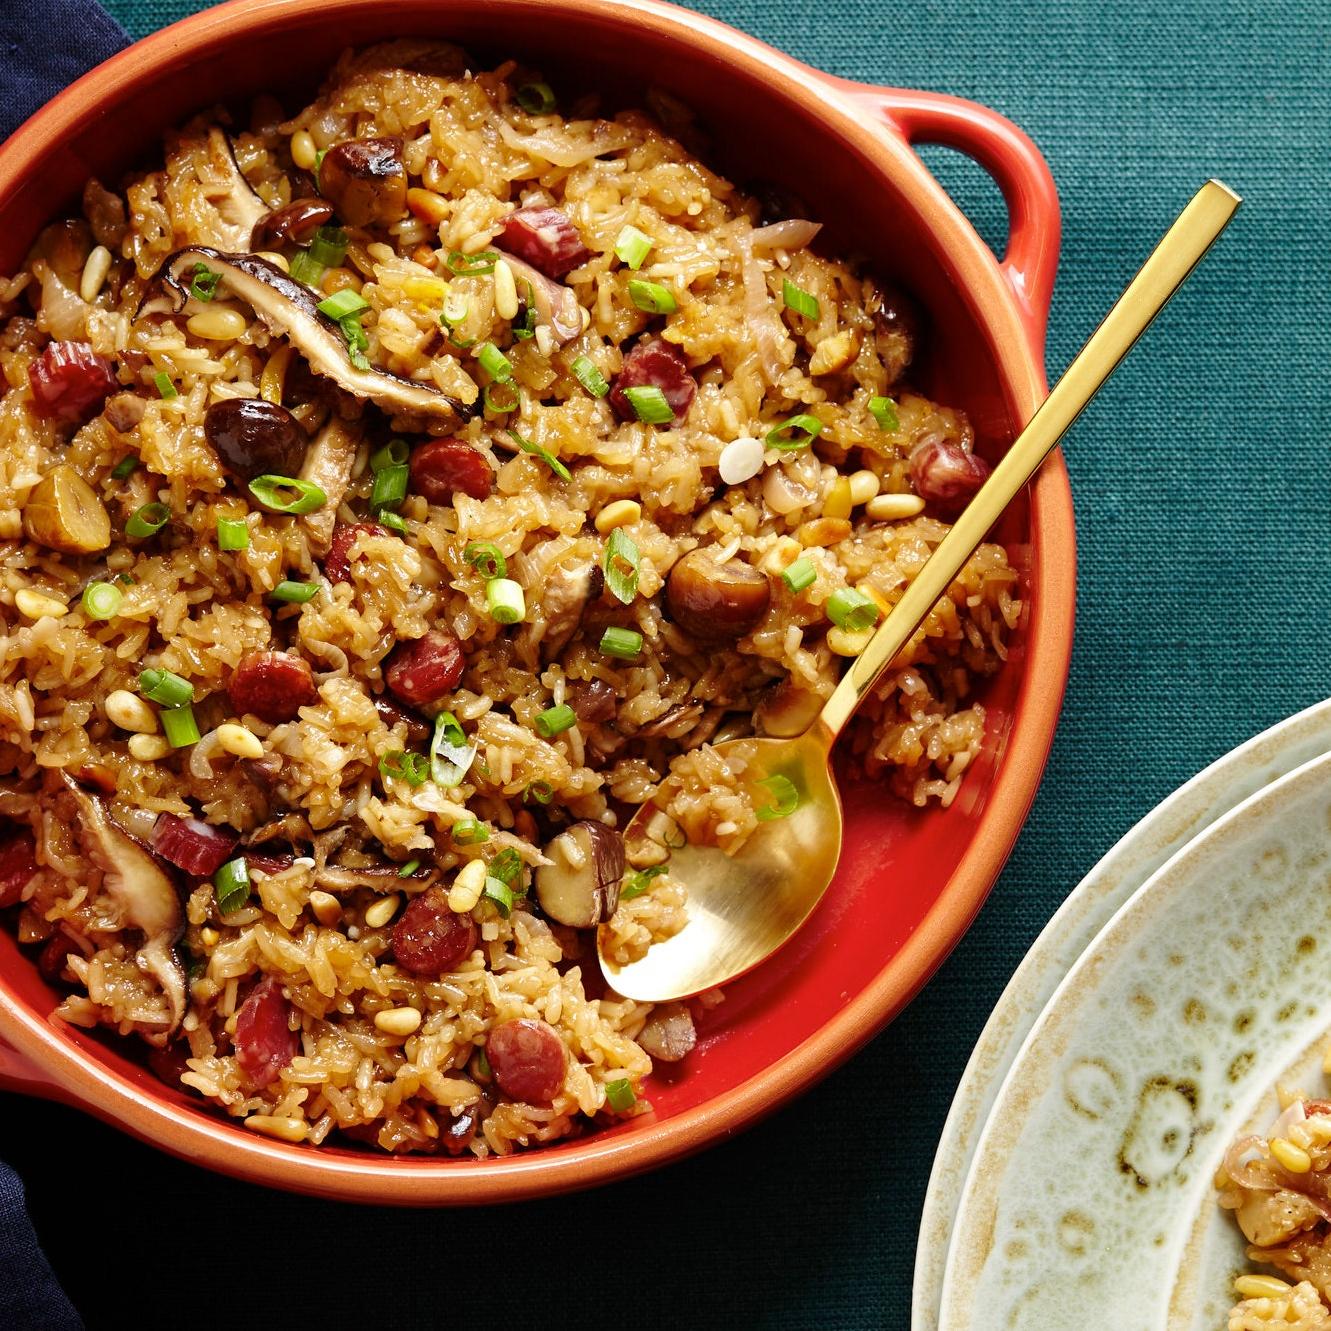  Get ready to fall in love with hearty brown rice, earthy mushrooms, and sweet chestnuts.